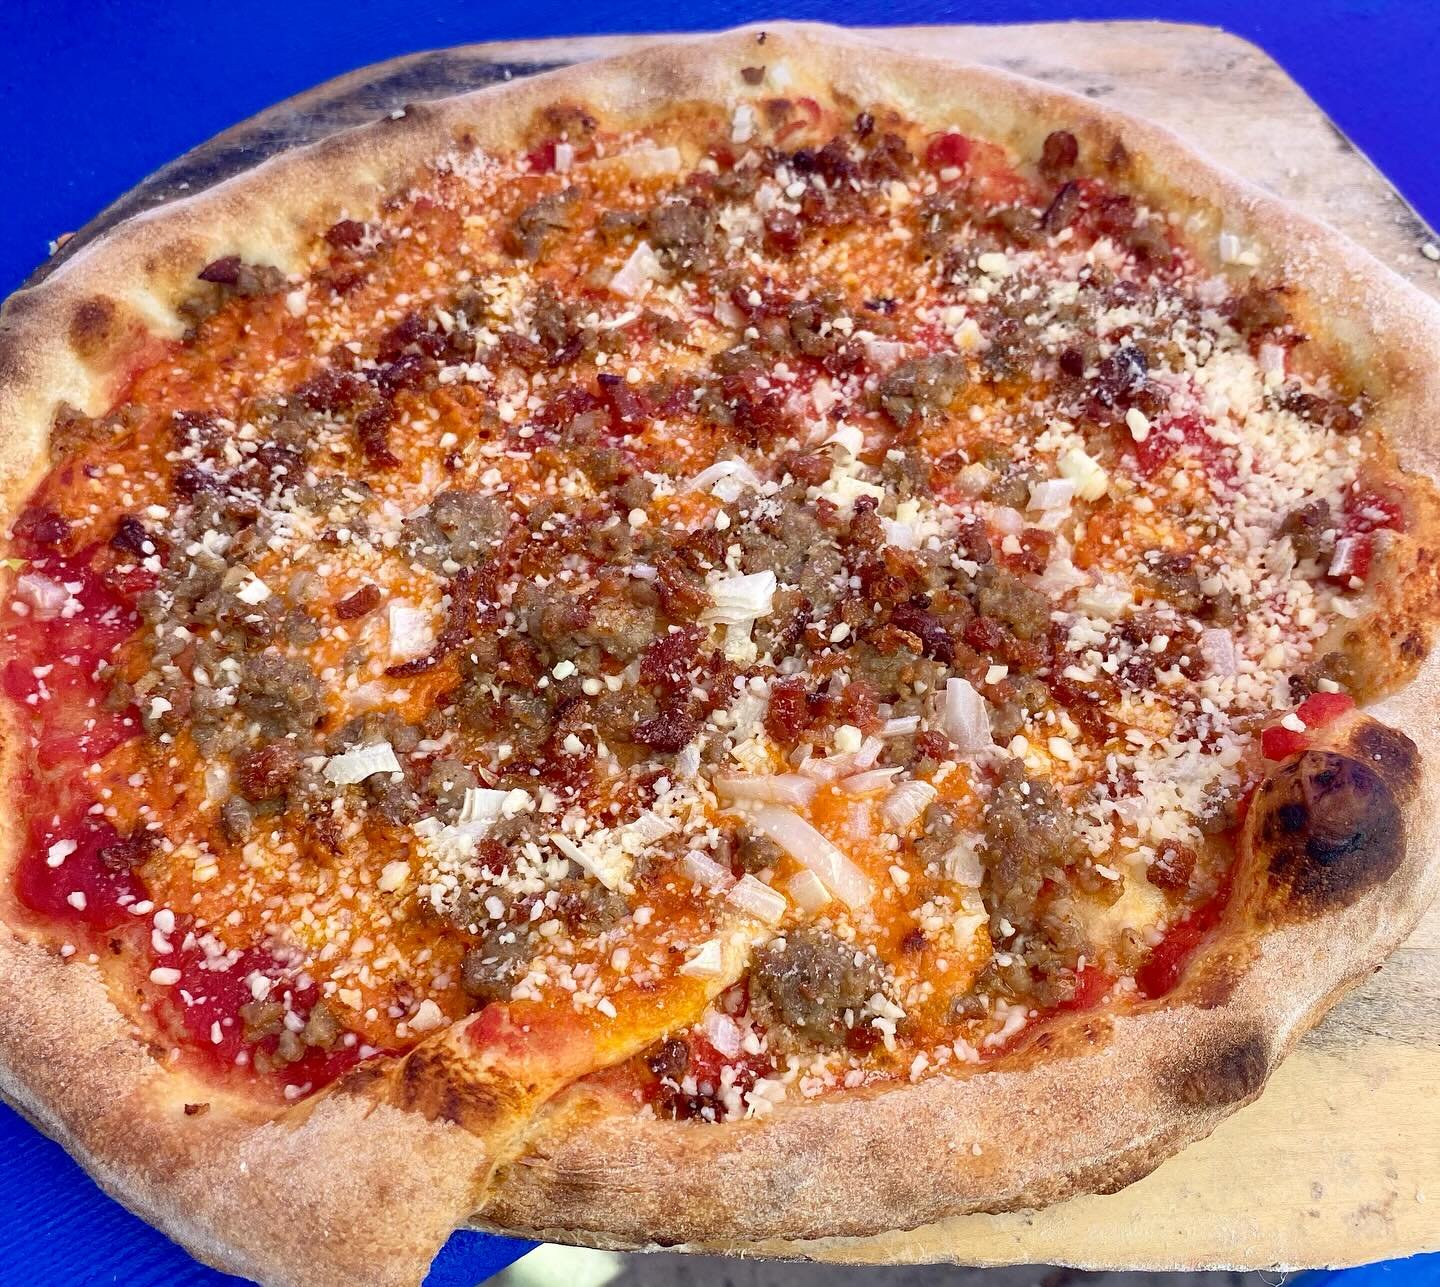 Look at that blue sky!! And the Pizza of the Day! It has Sausage, Bacon, San Marzano Tomatoes, Vodka Sauce and Parmesan!
#bronxpizza #nycpizza #kingsbridgesocialclub